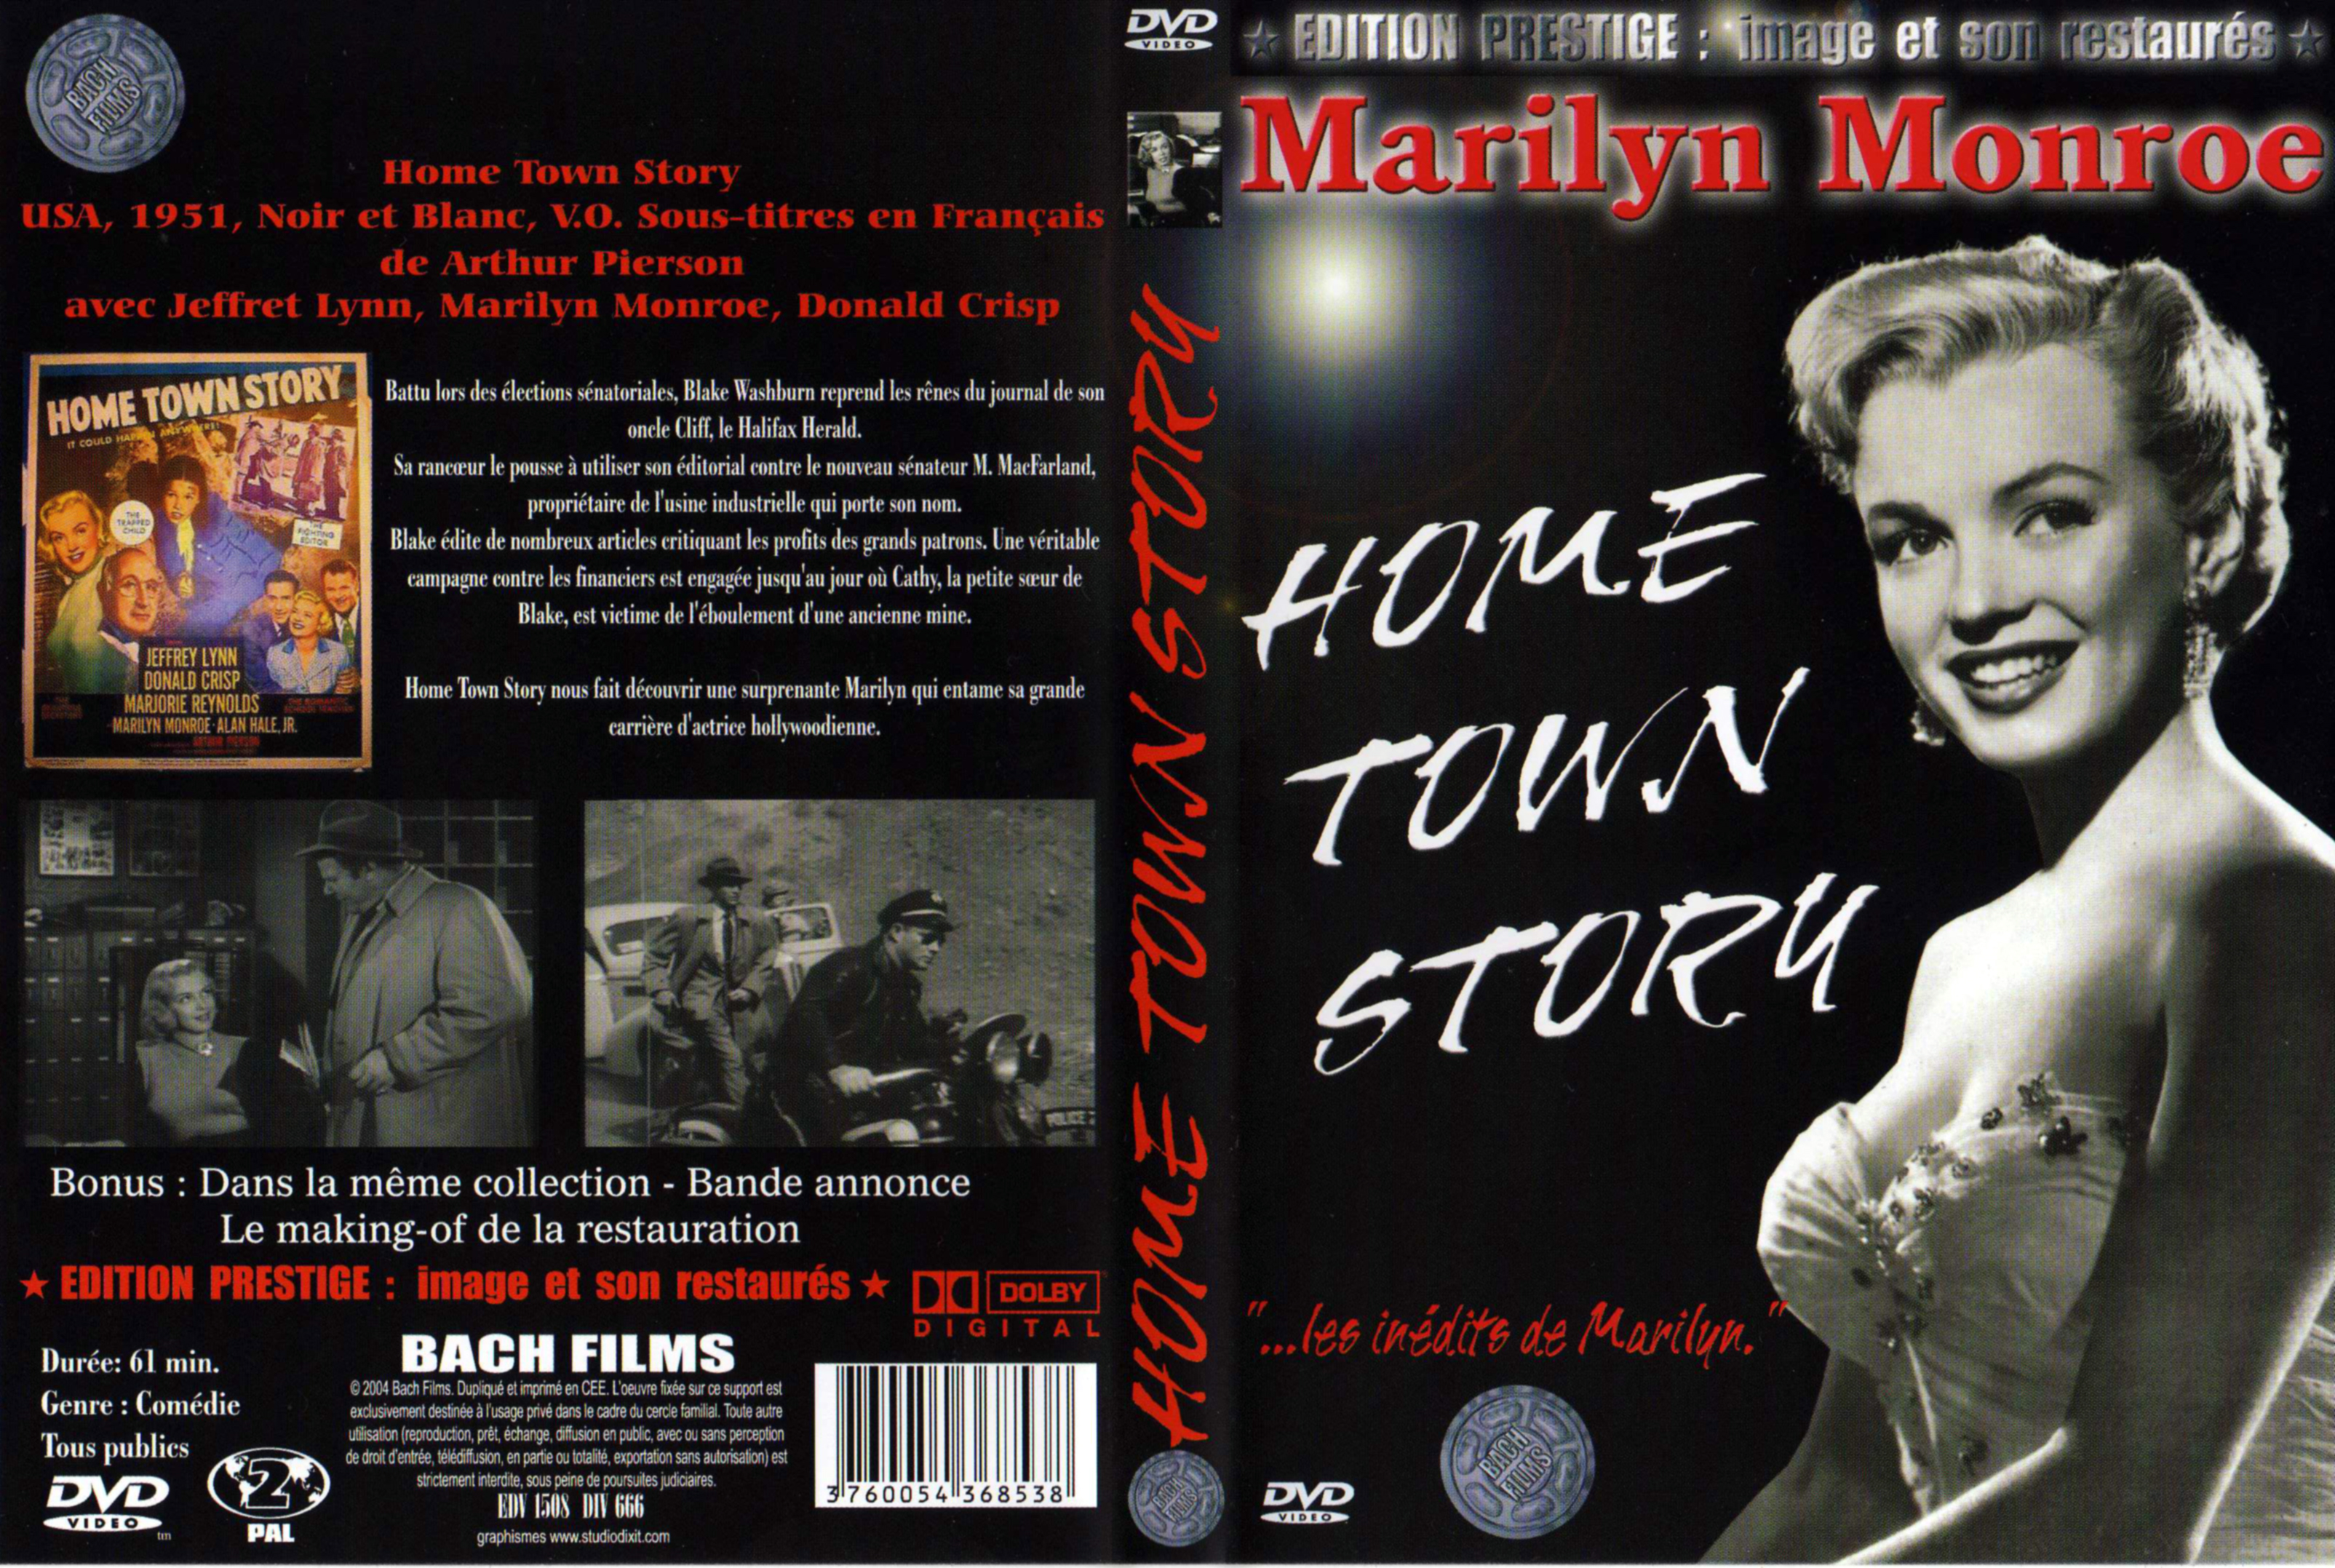 Jaquette DVD Home town story